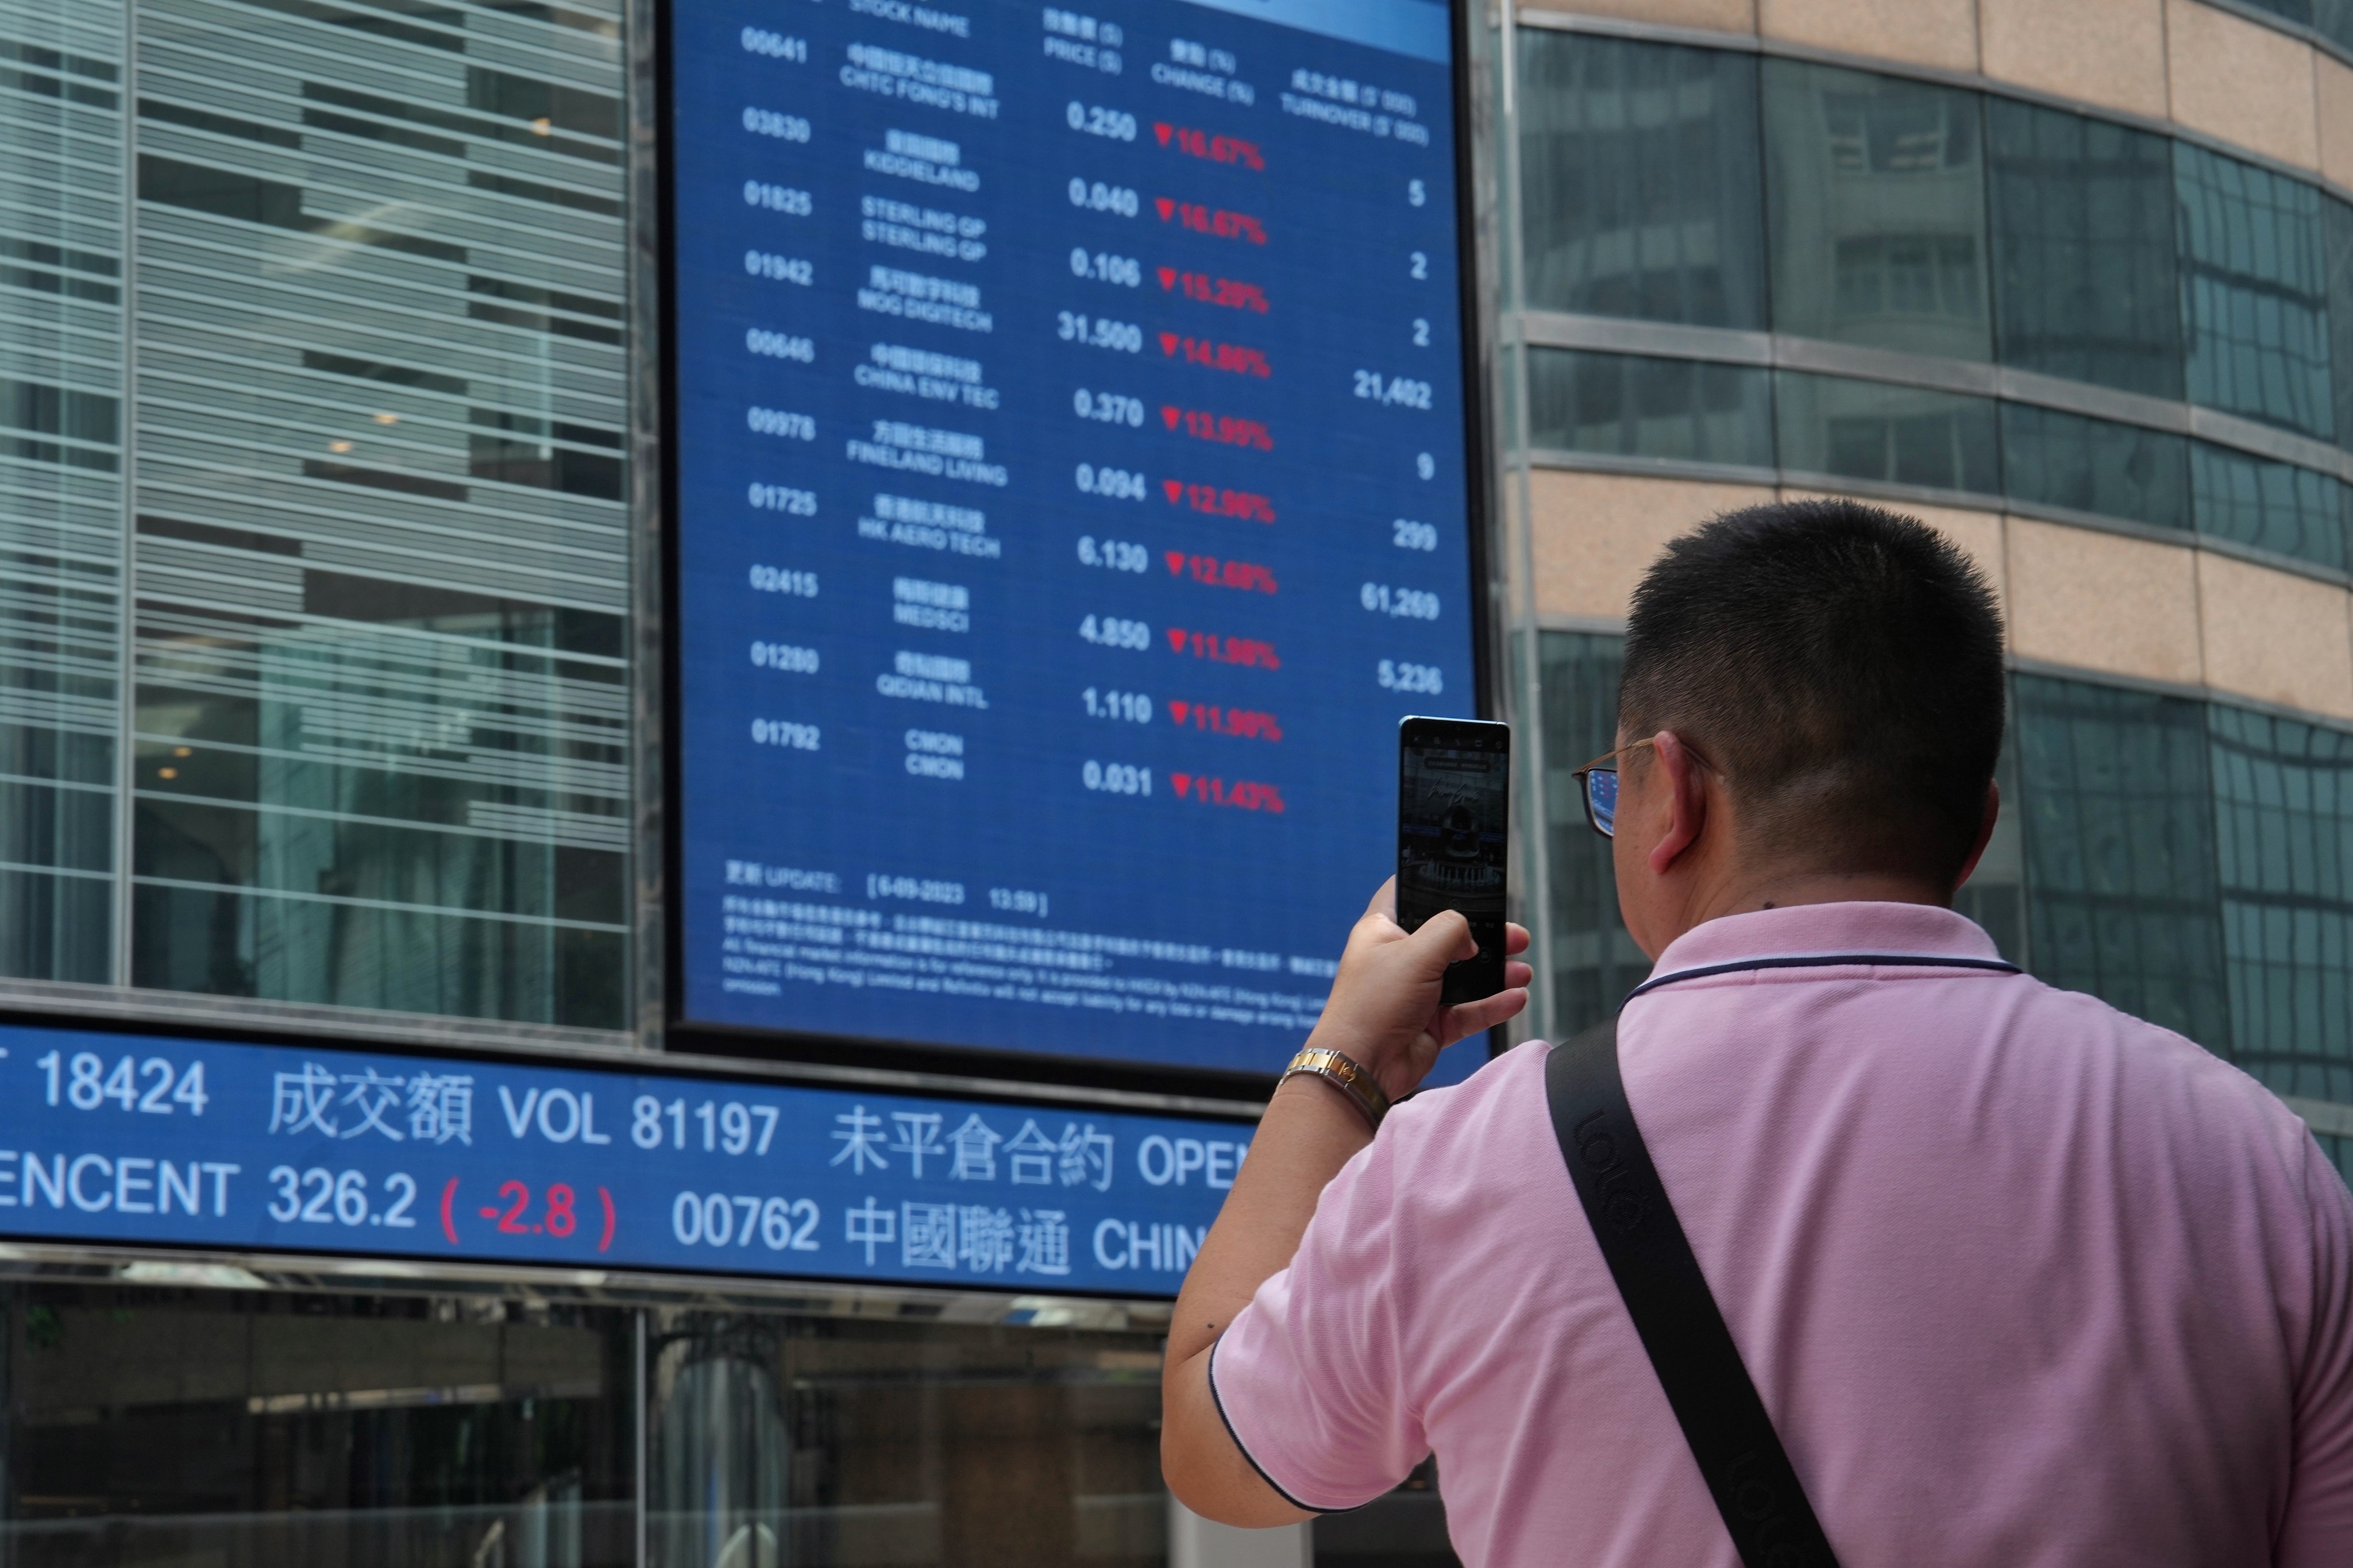 A man takes pictures of stock prices outside the Exchange Square in Central, Hong Kong in September 2023 Photo: Elson LI